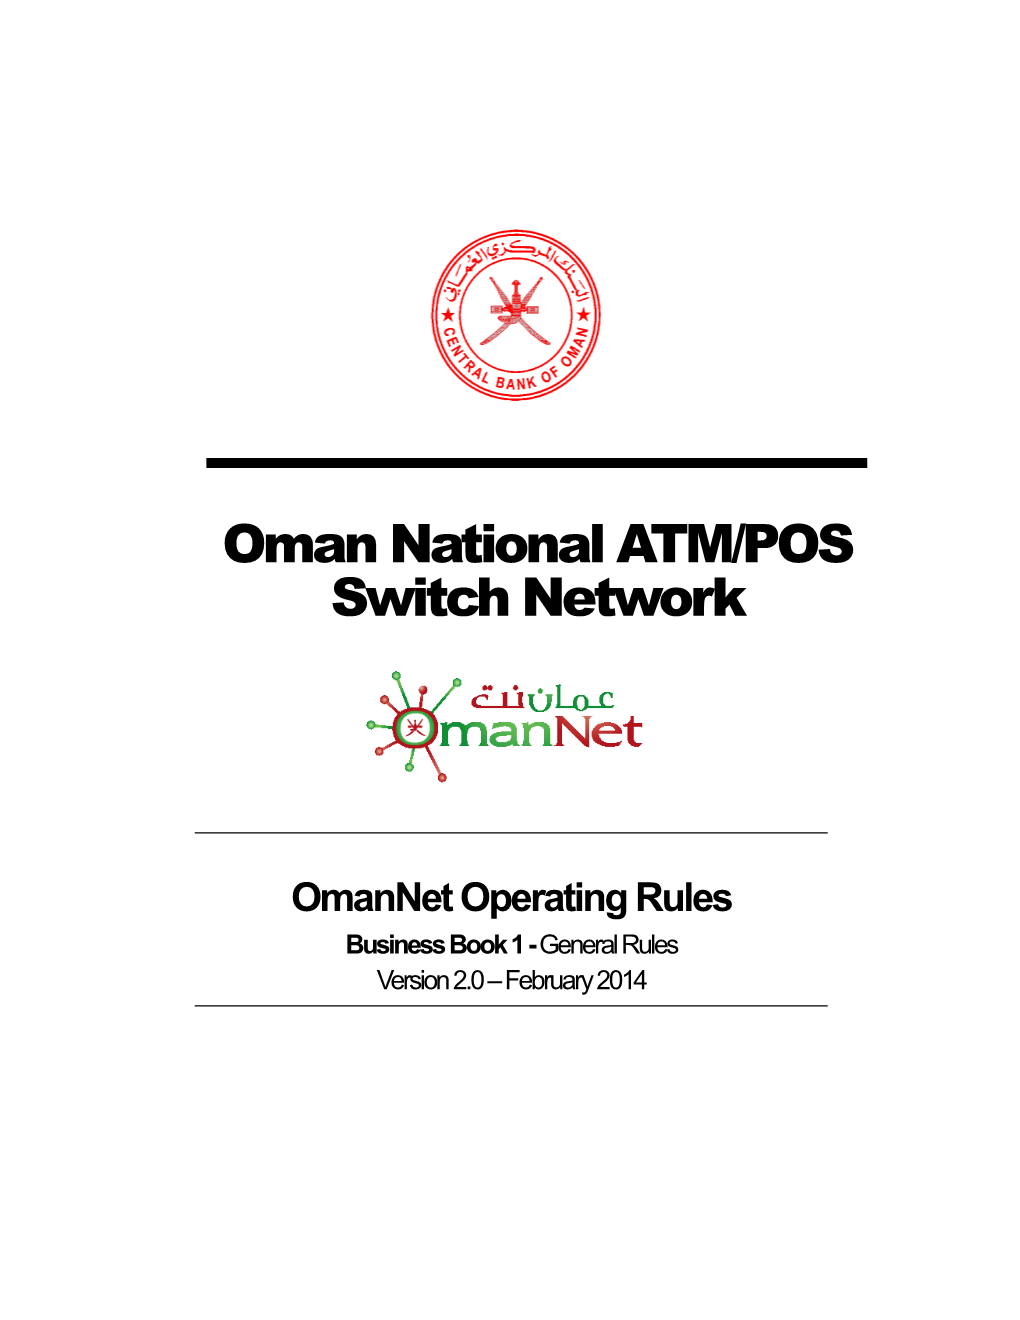 Oman National ATM/POS Switch Network